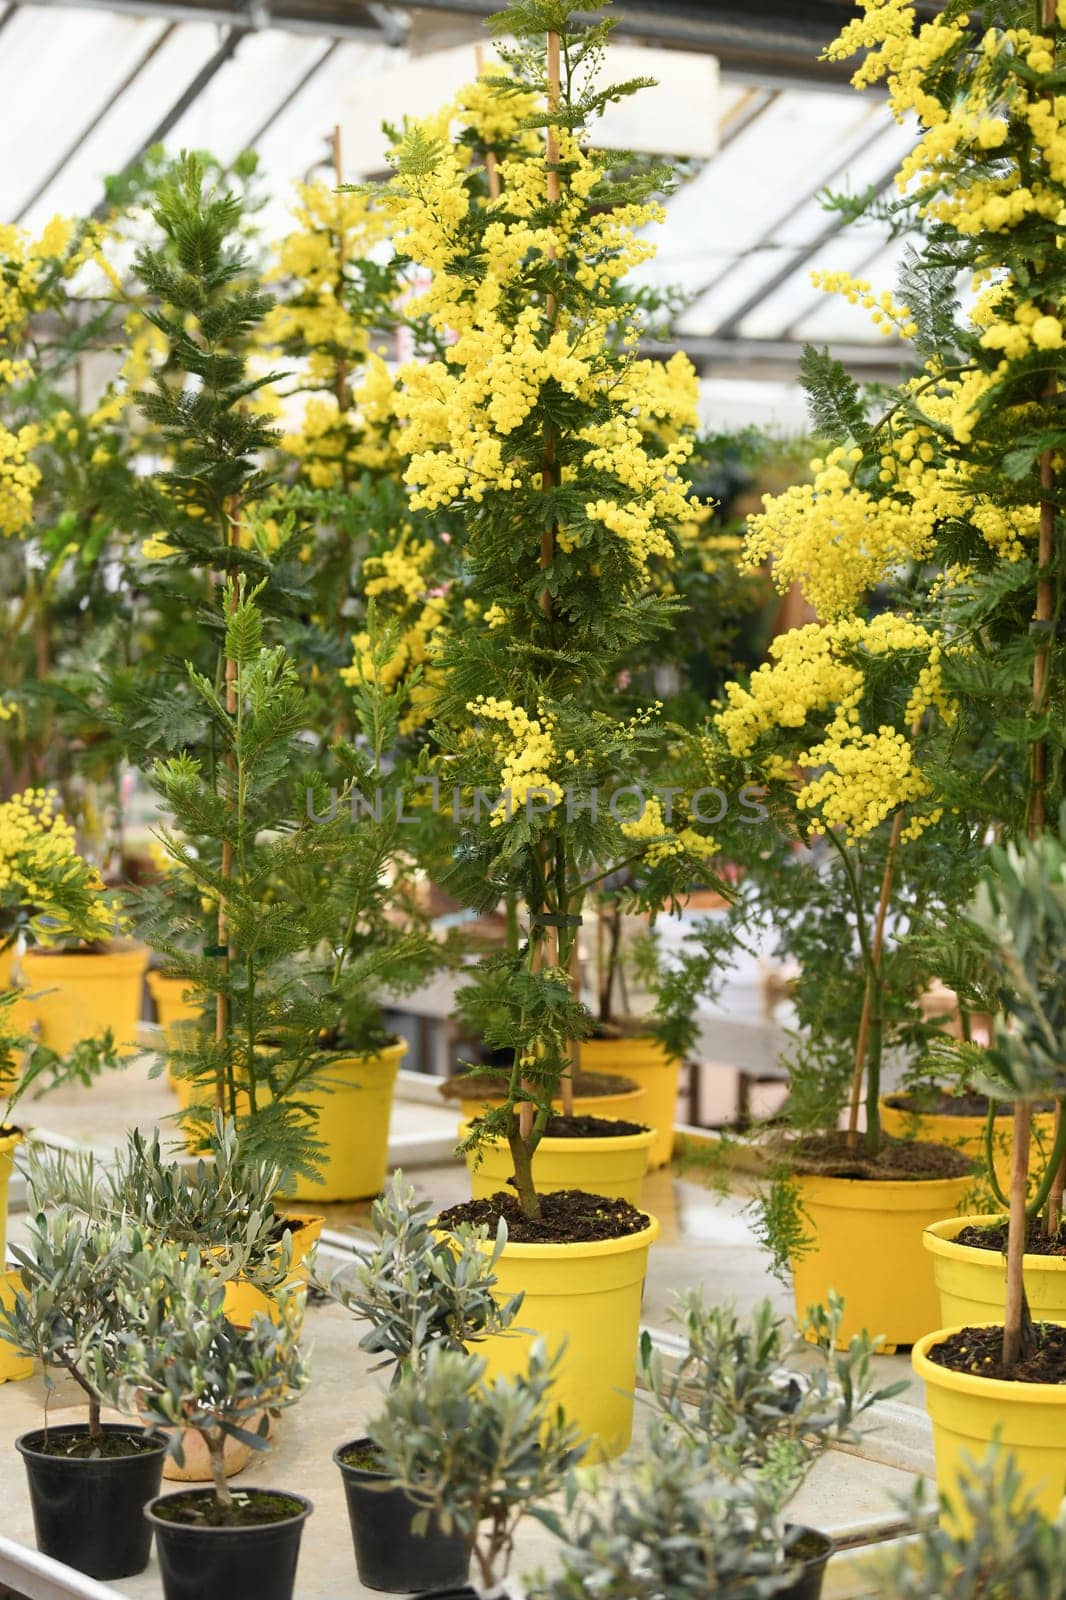 Mimosa trees in the pots for planting in the ground at a market